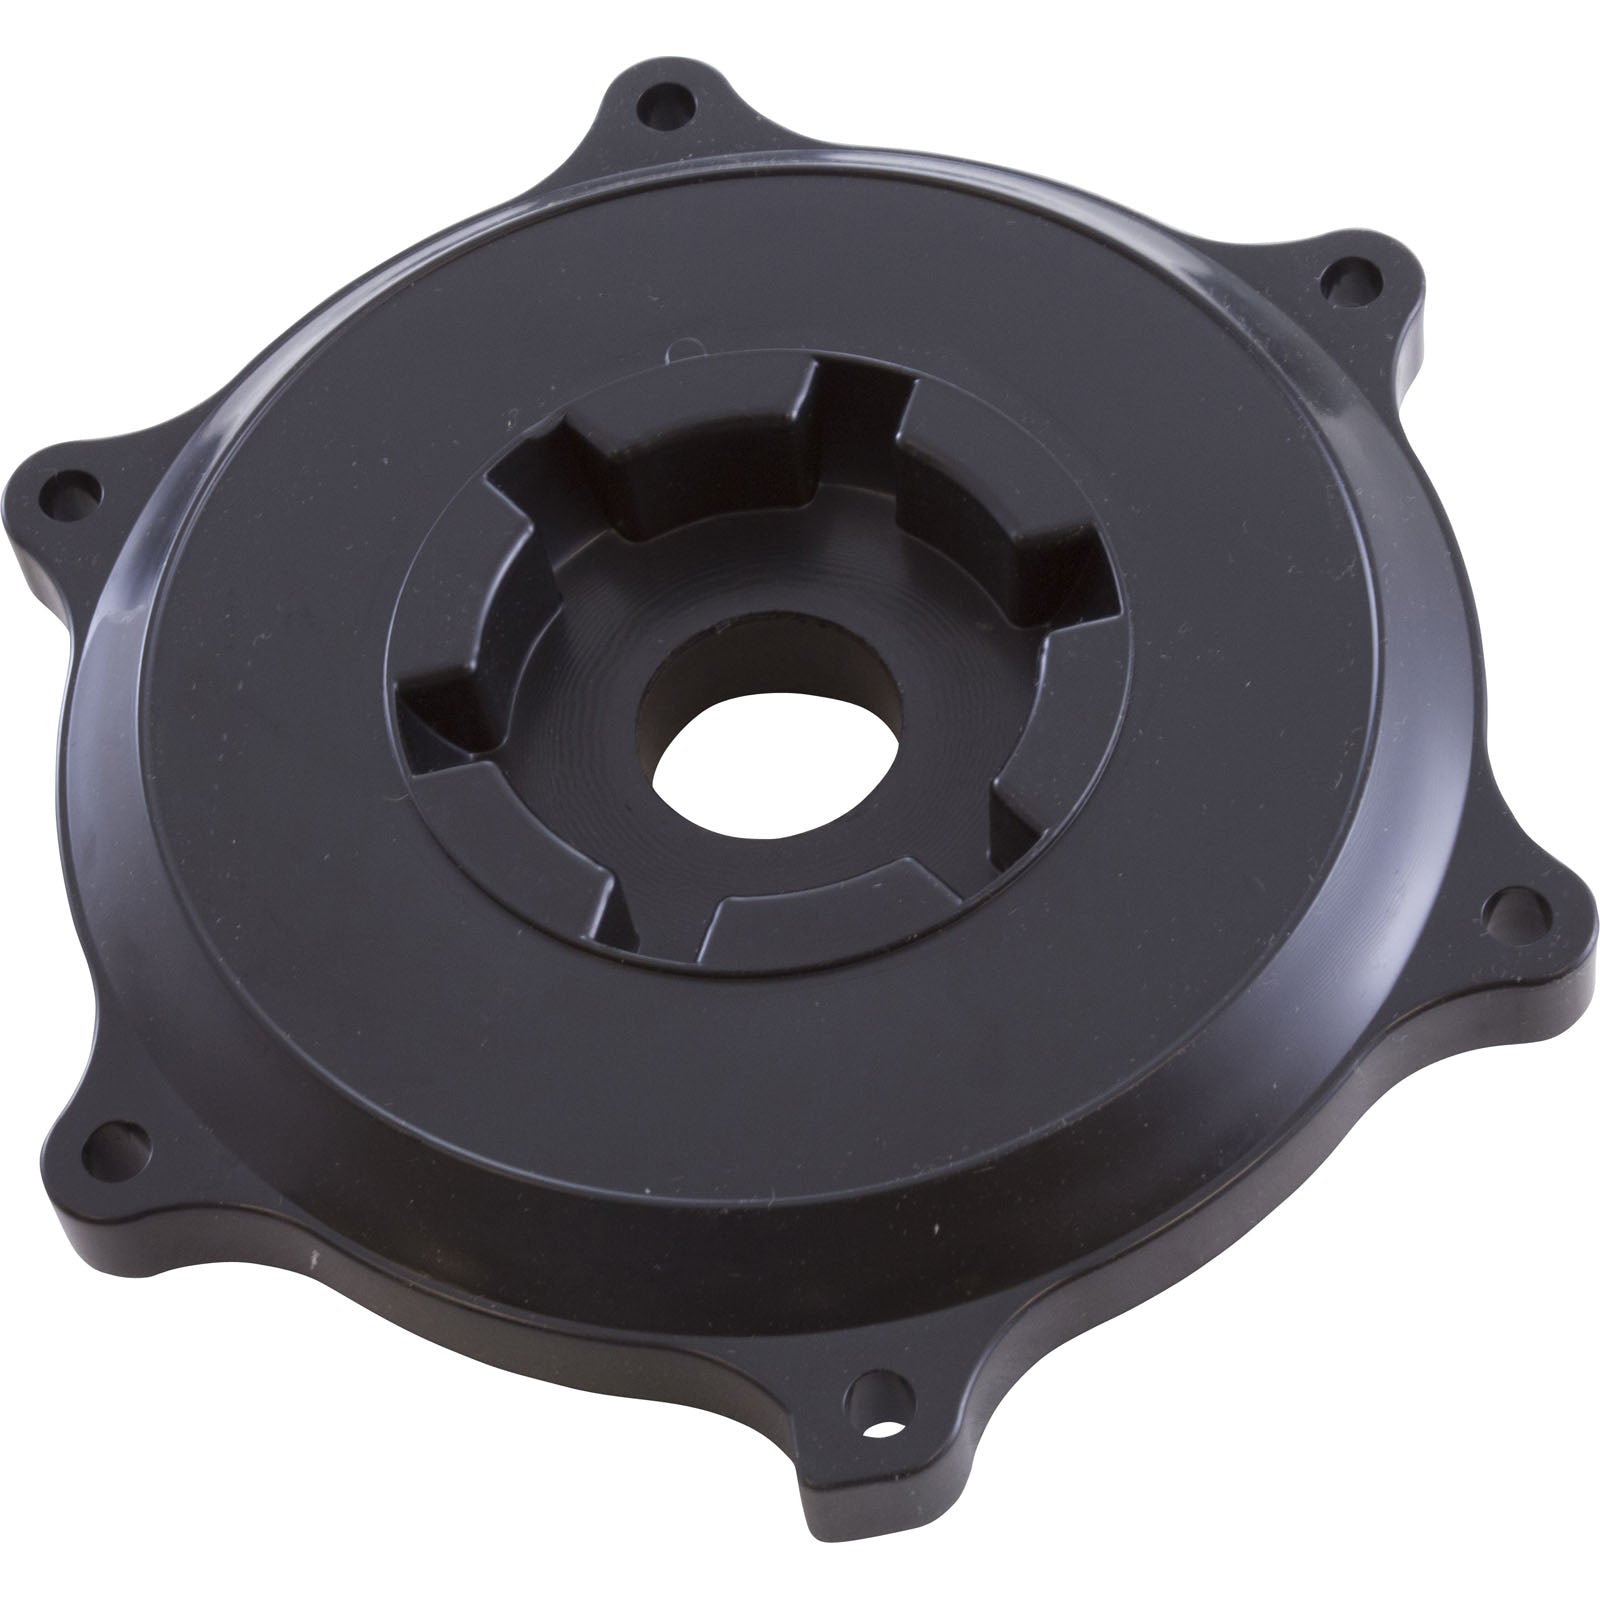 Cover, Pentair PacFab 1-1/2" Top/Side Mount Valve, Black- 271165